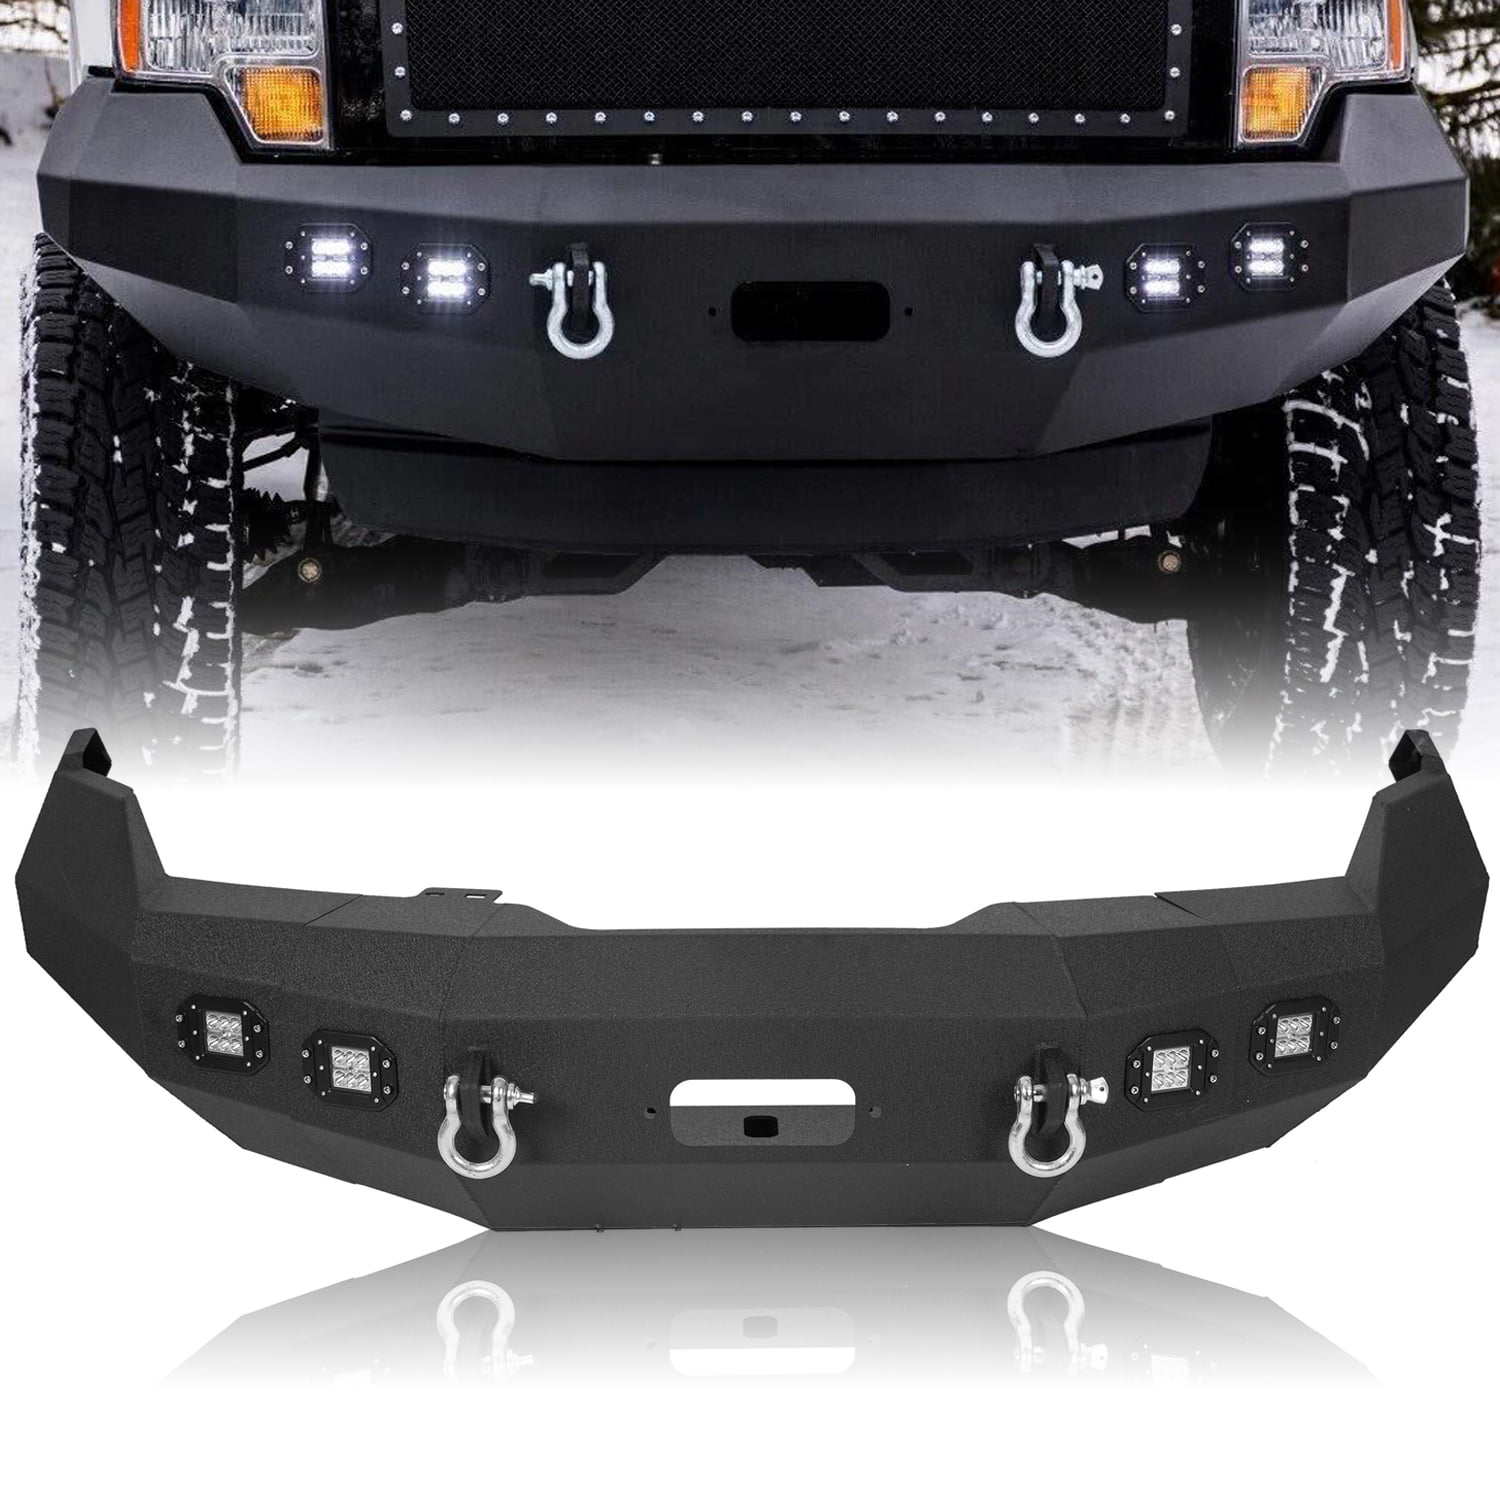 Front Bumper Pad Guard Insert Textured Pair For 2009-2014 Ford F-150 Set of 2